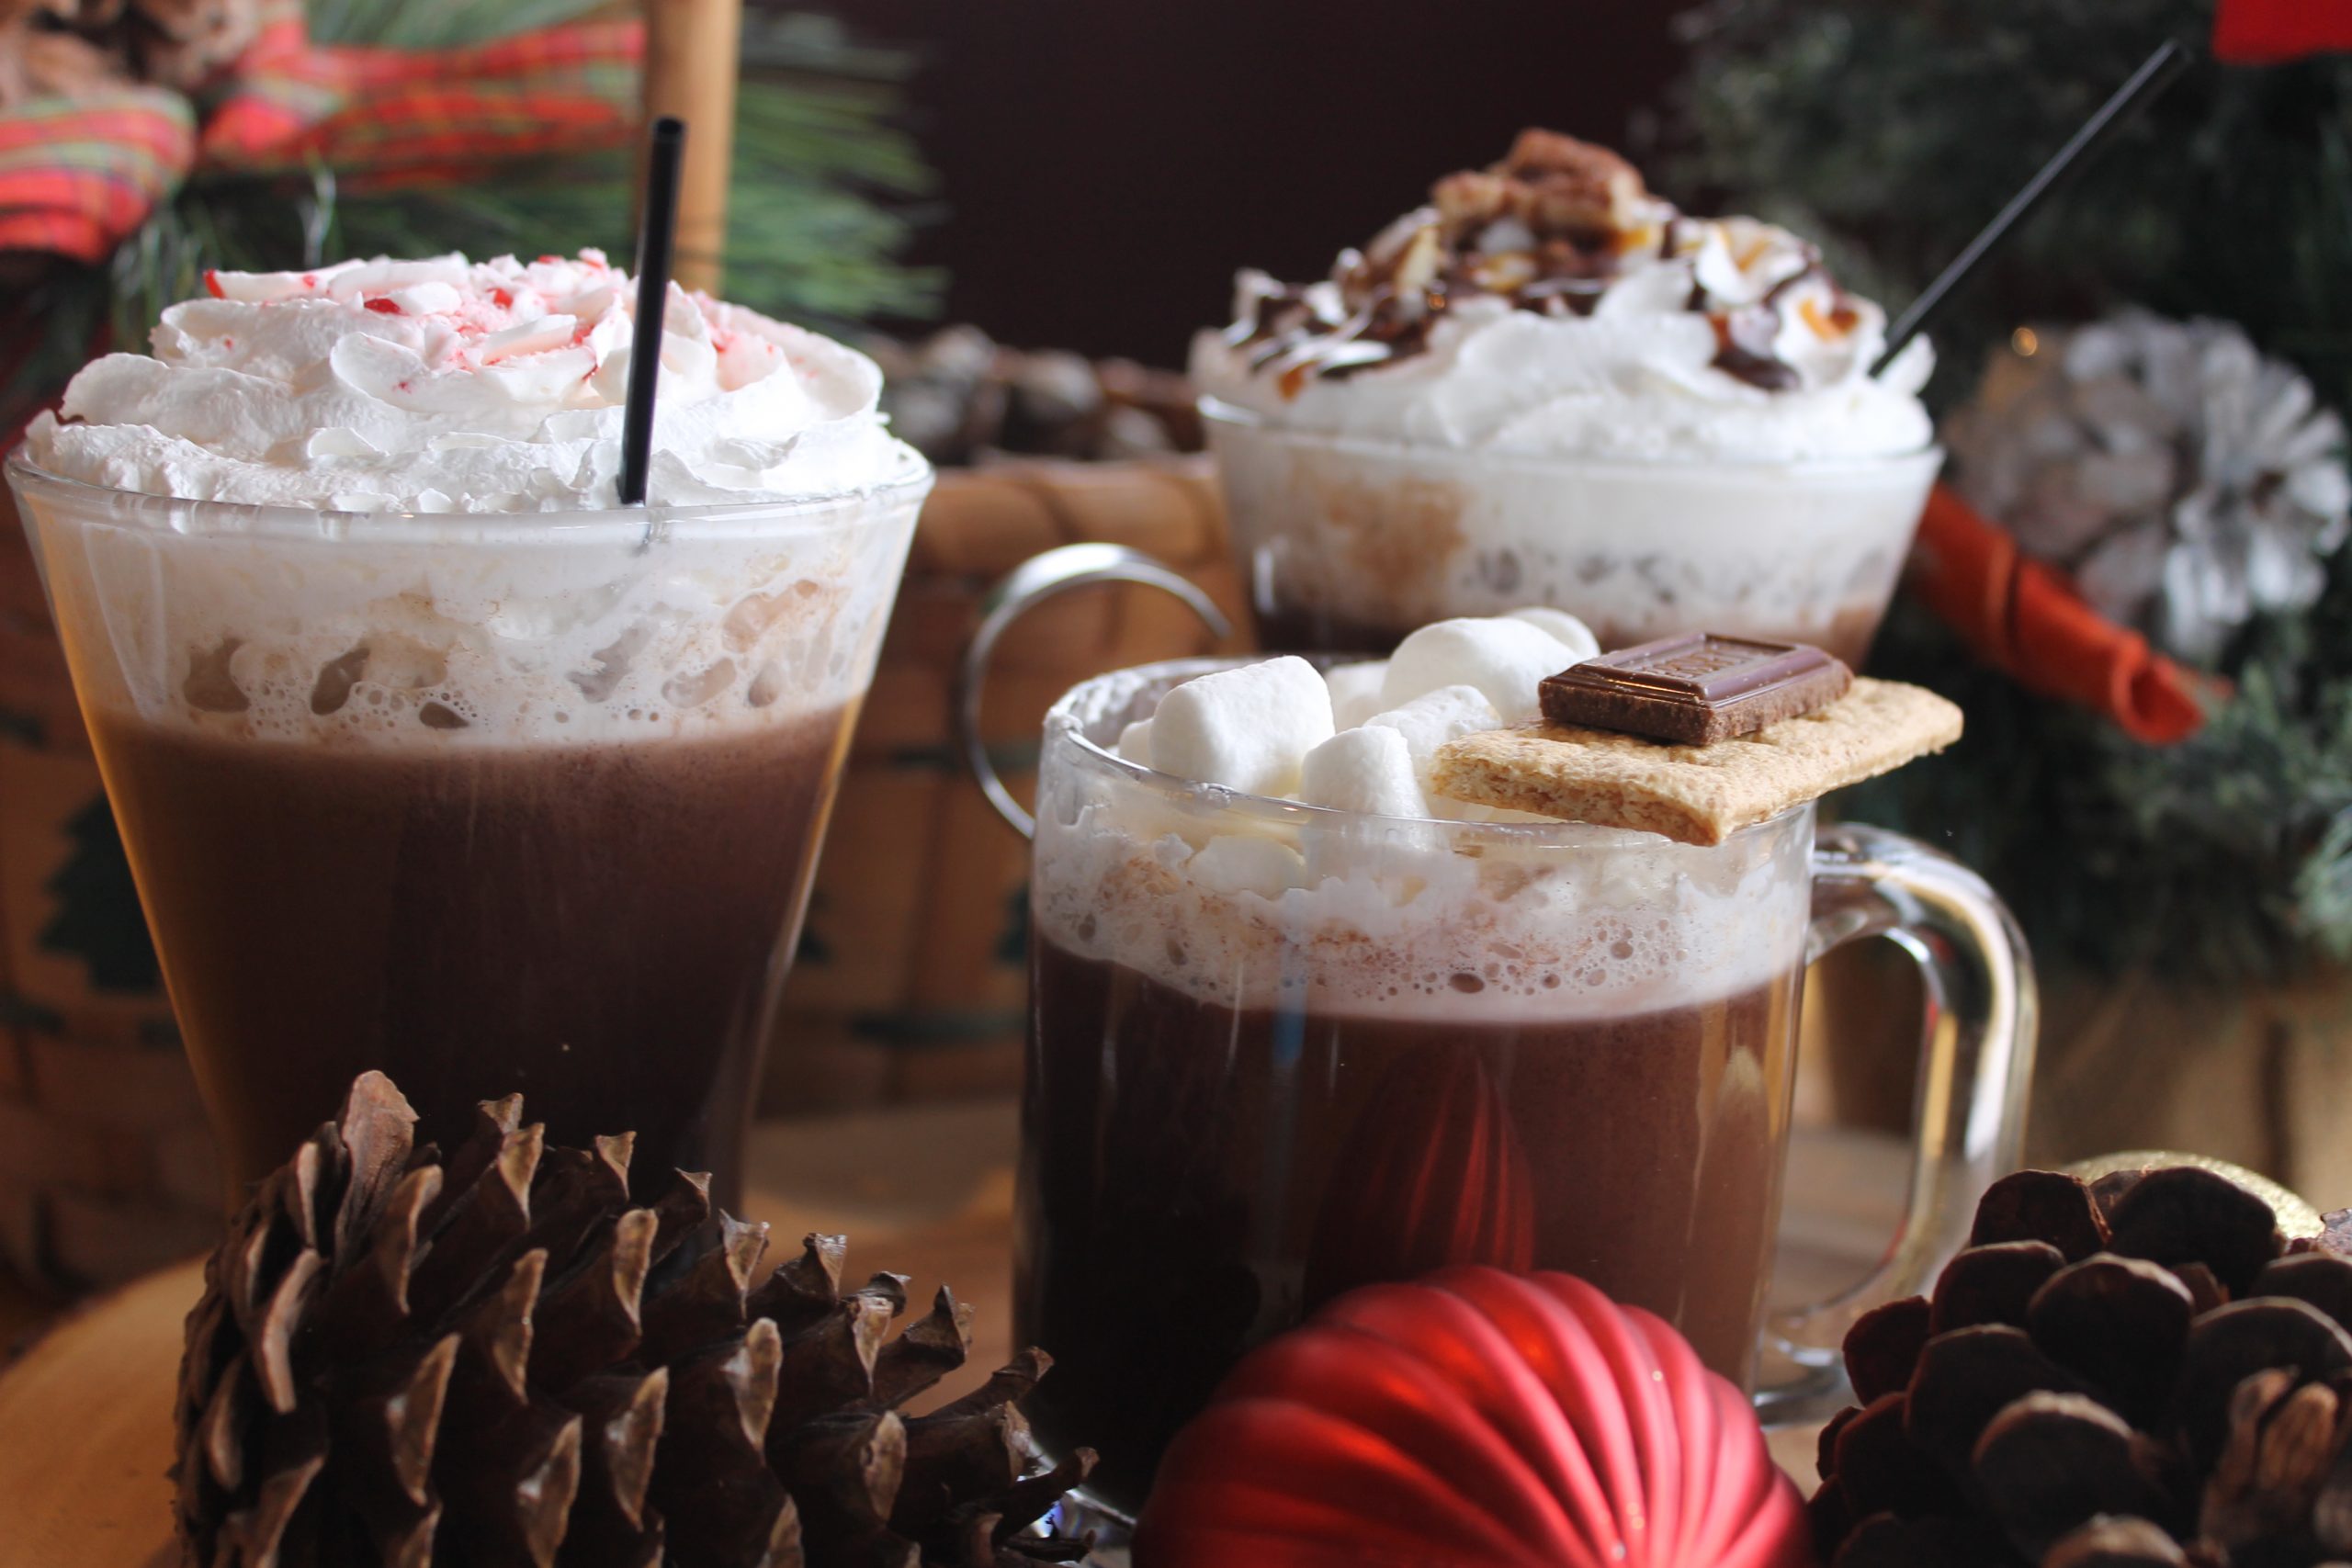 Hot Cocoa at Glenwood Caverns is one of several holiday traditions